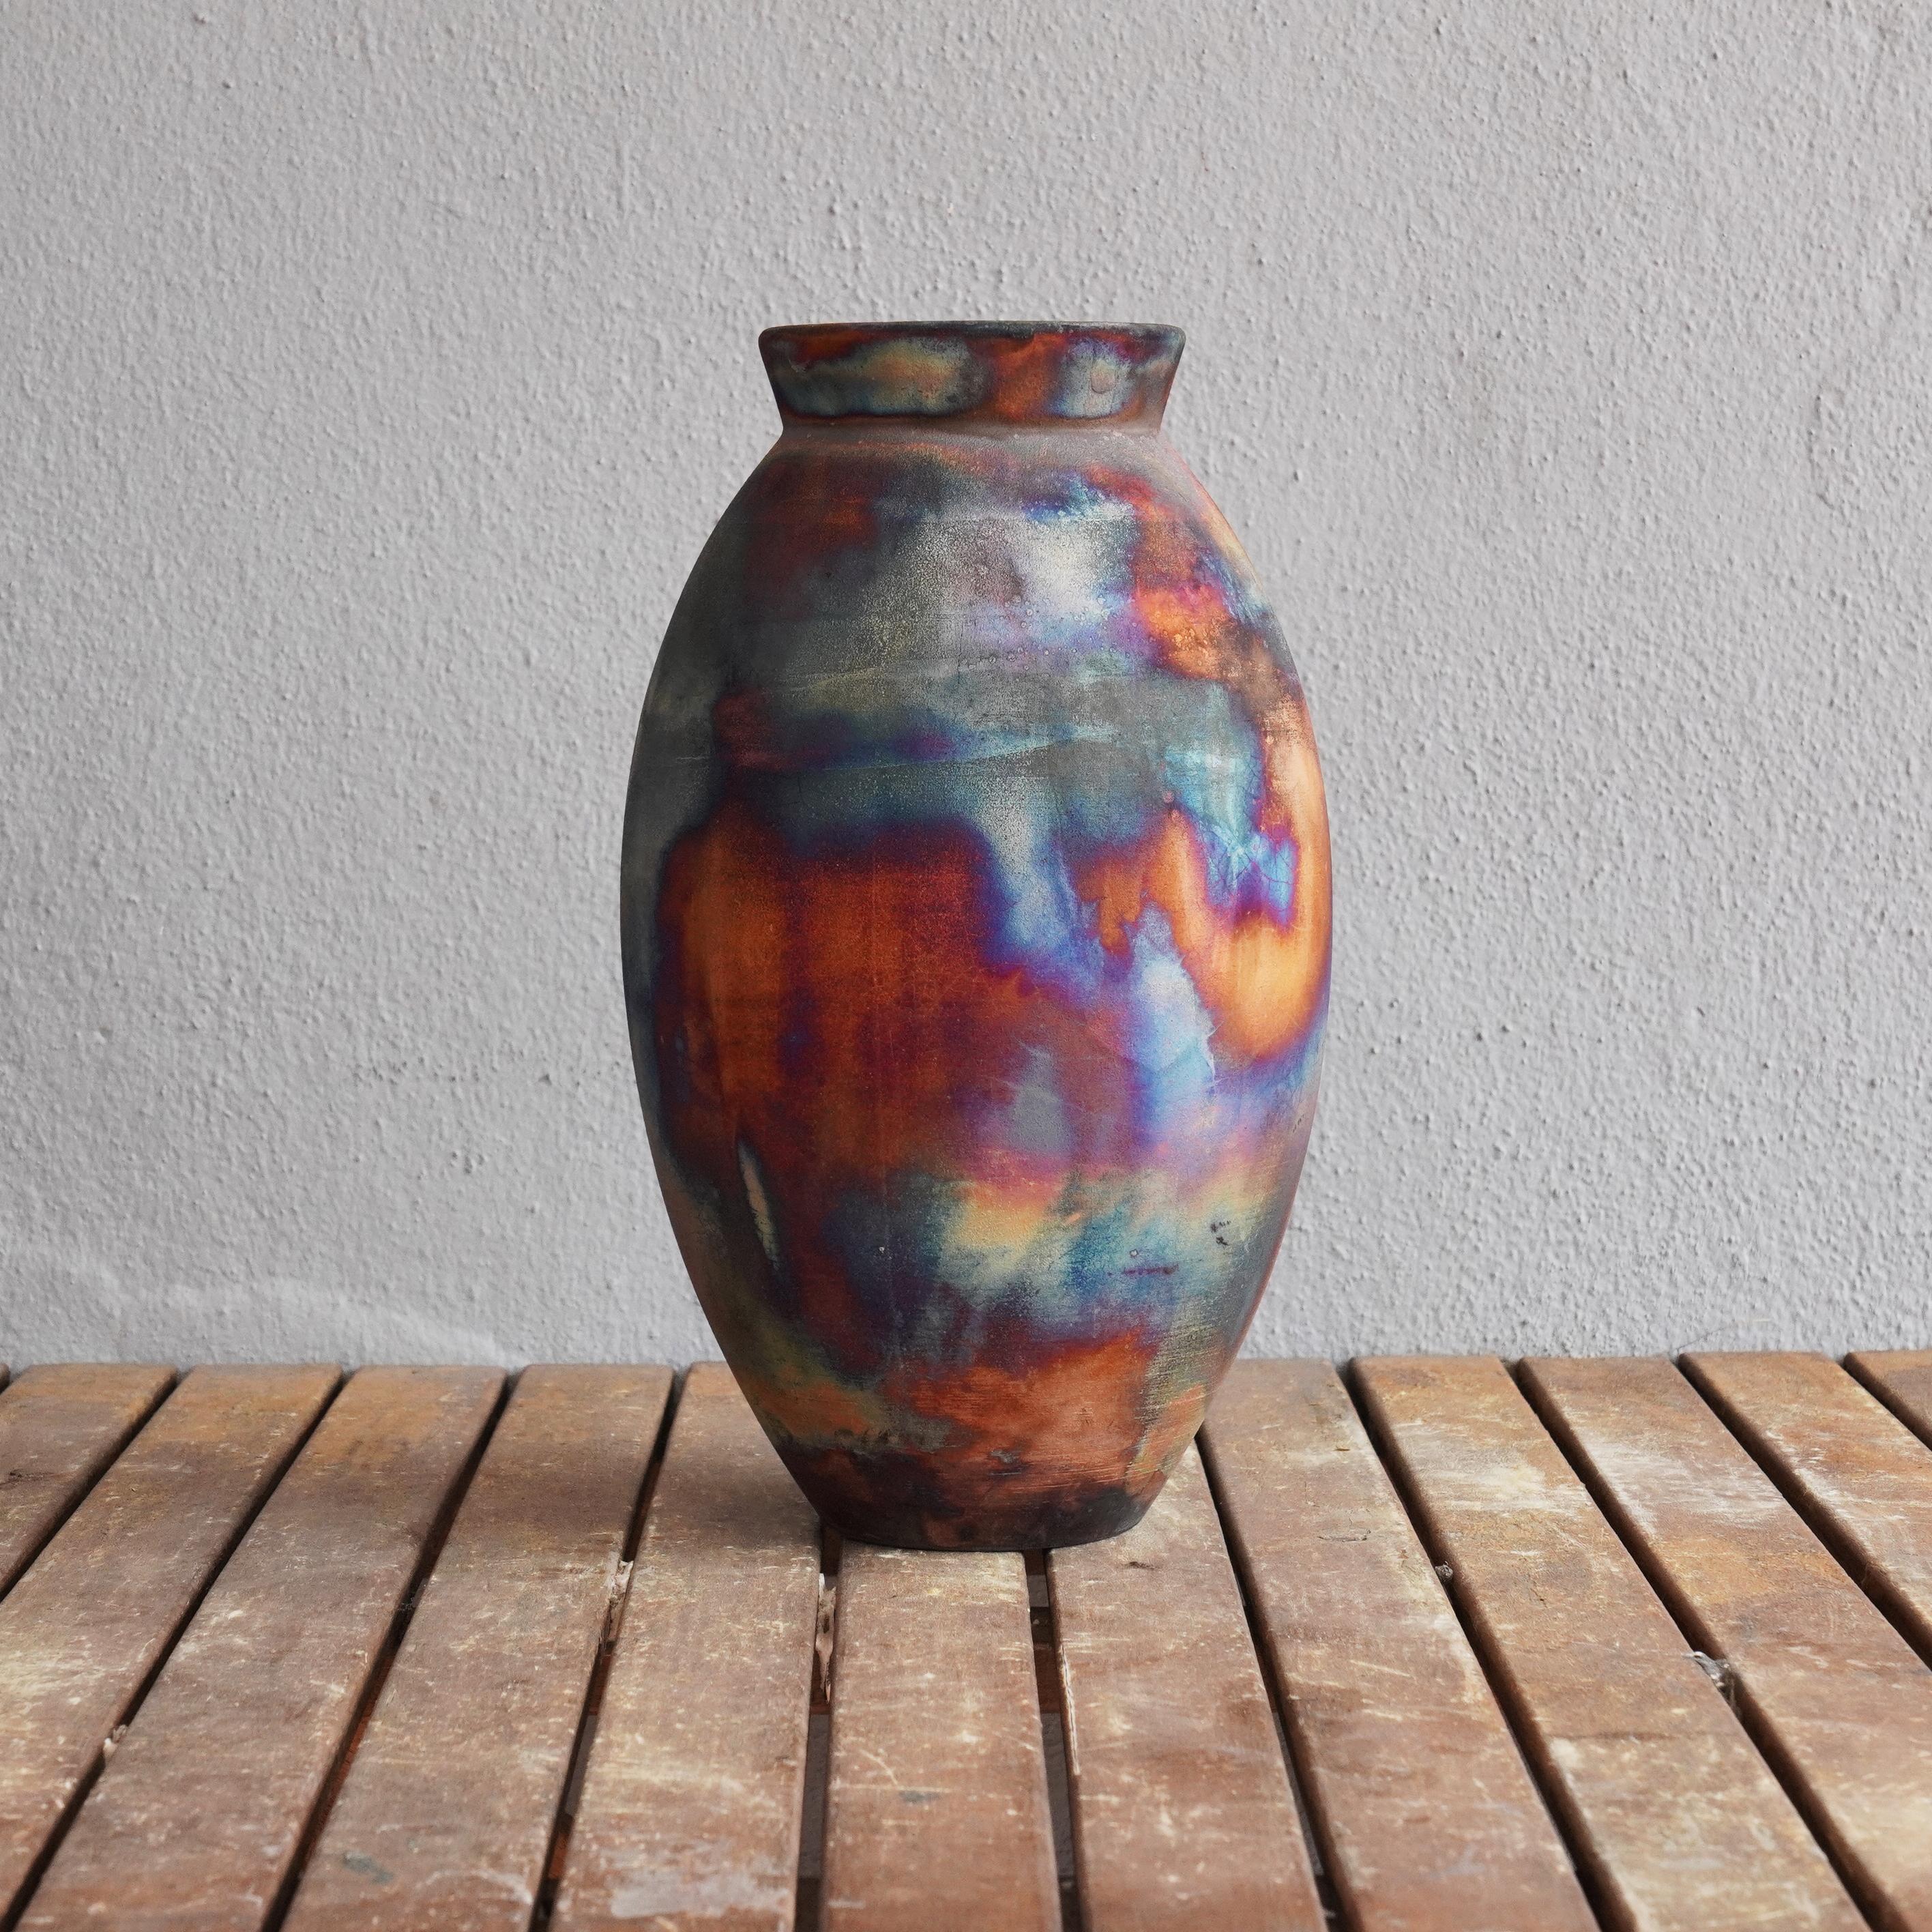 The Large Oval Raku fired vase centerpiece Series by RAAQUU.

A mesmerizing sight to behold as soon as the rainbow-like patinas catch your eye. The Oval Vase is a tall, teardrop-shaped design best for adding a touch of elegance and intrigue to an